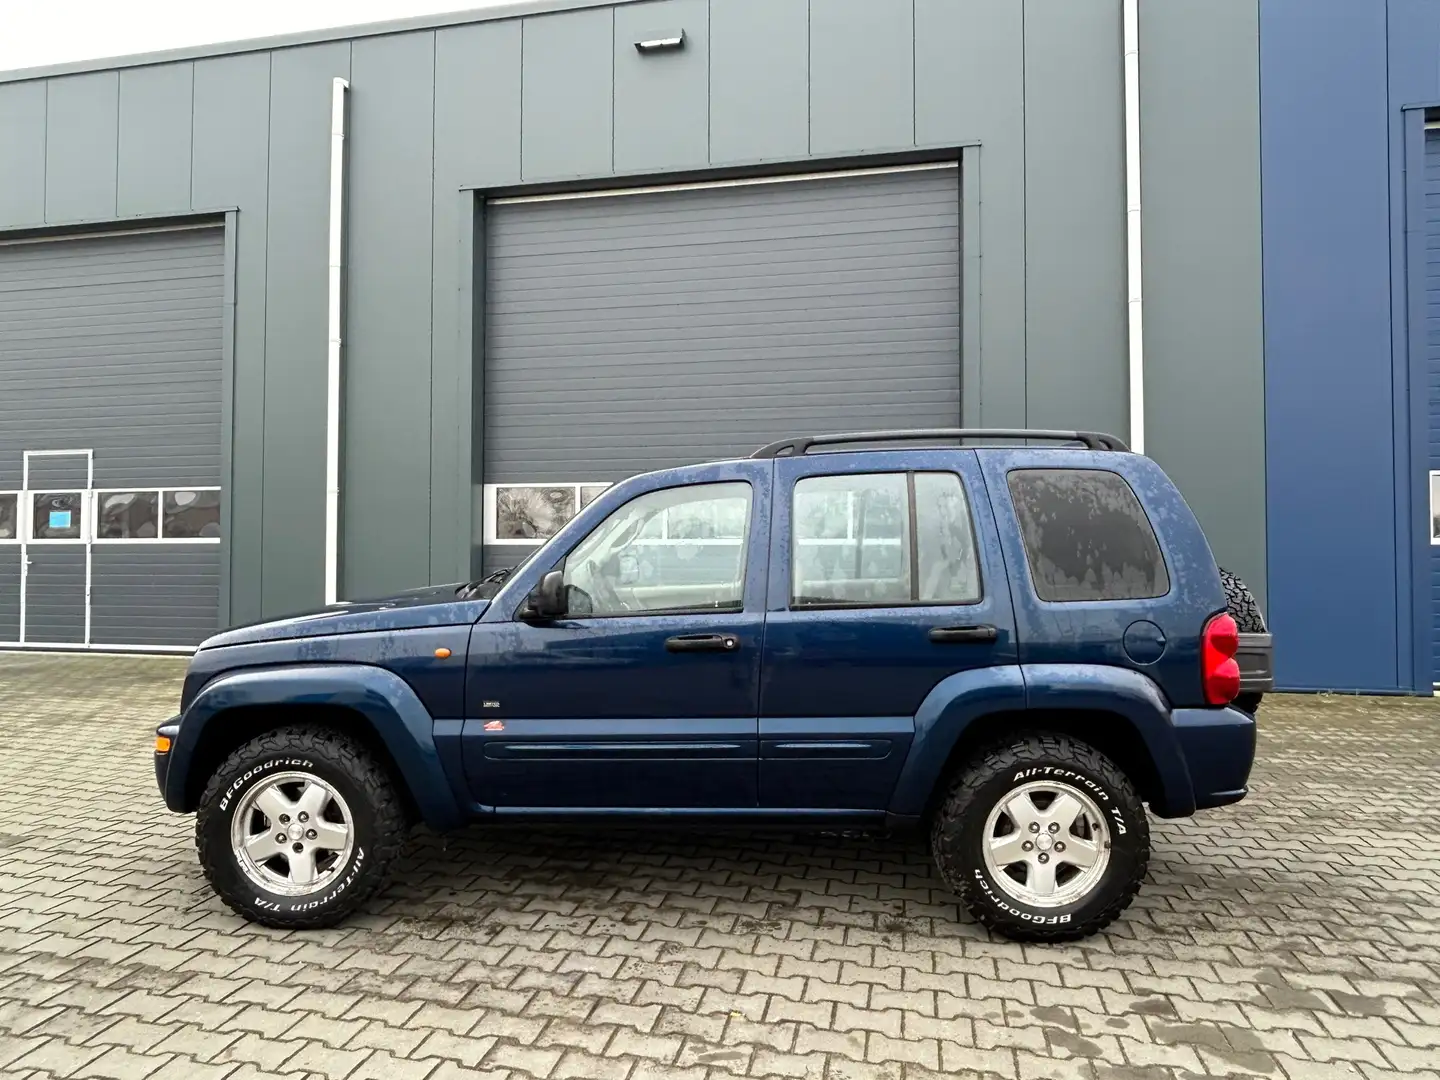 Jeep Cherokee 3.7i V6 Sport Plus Automaat+Cruise Control+ Airco Blauw - 2